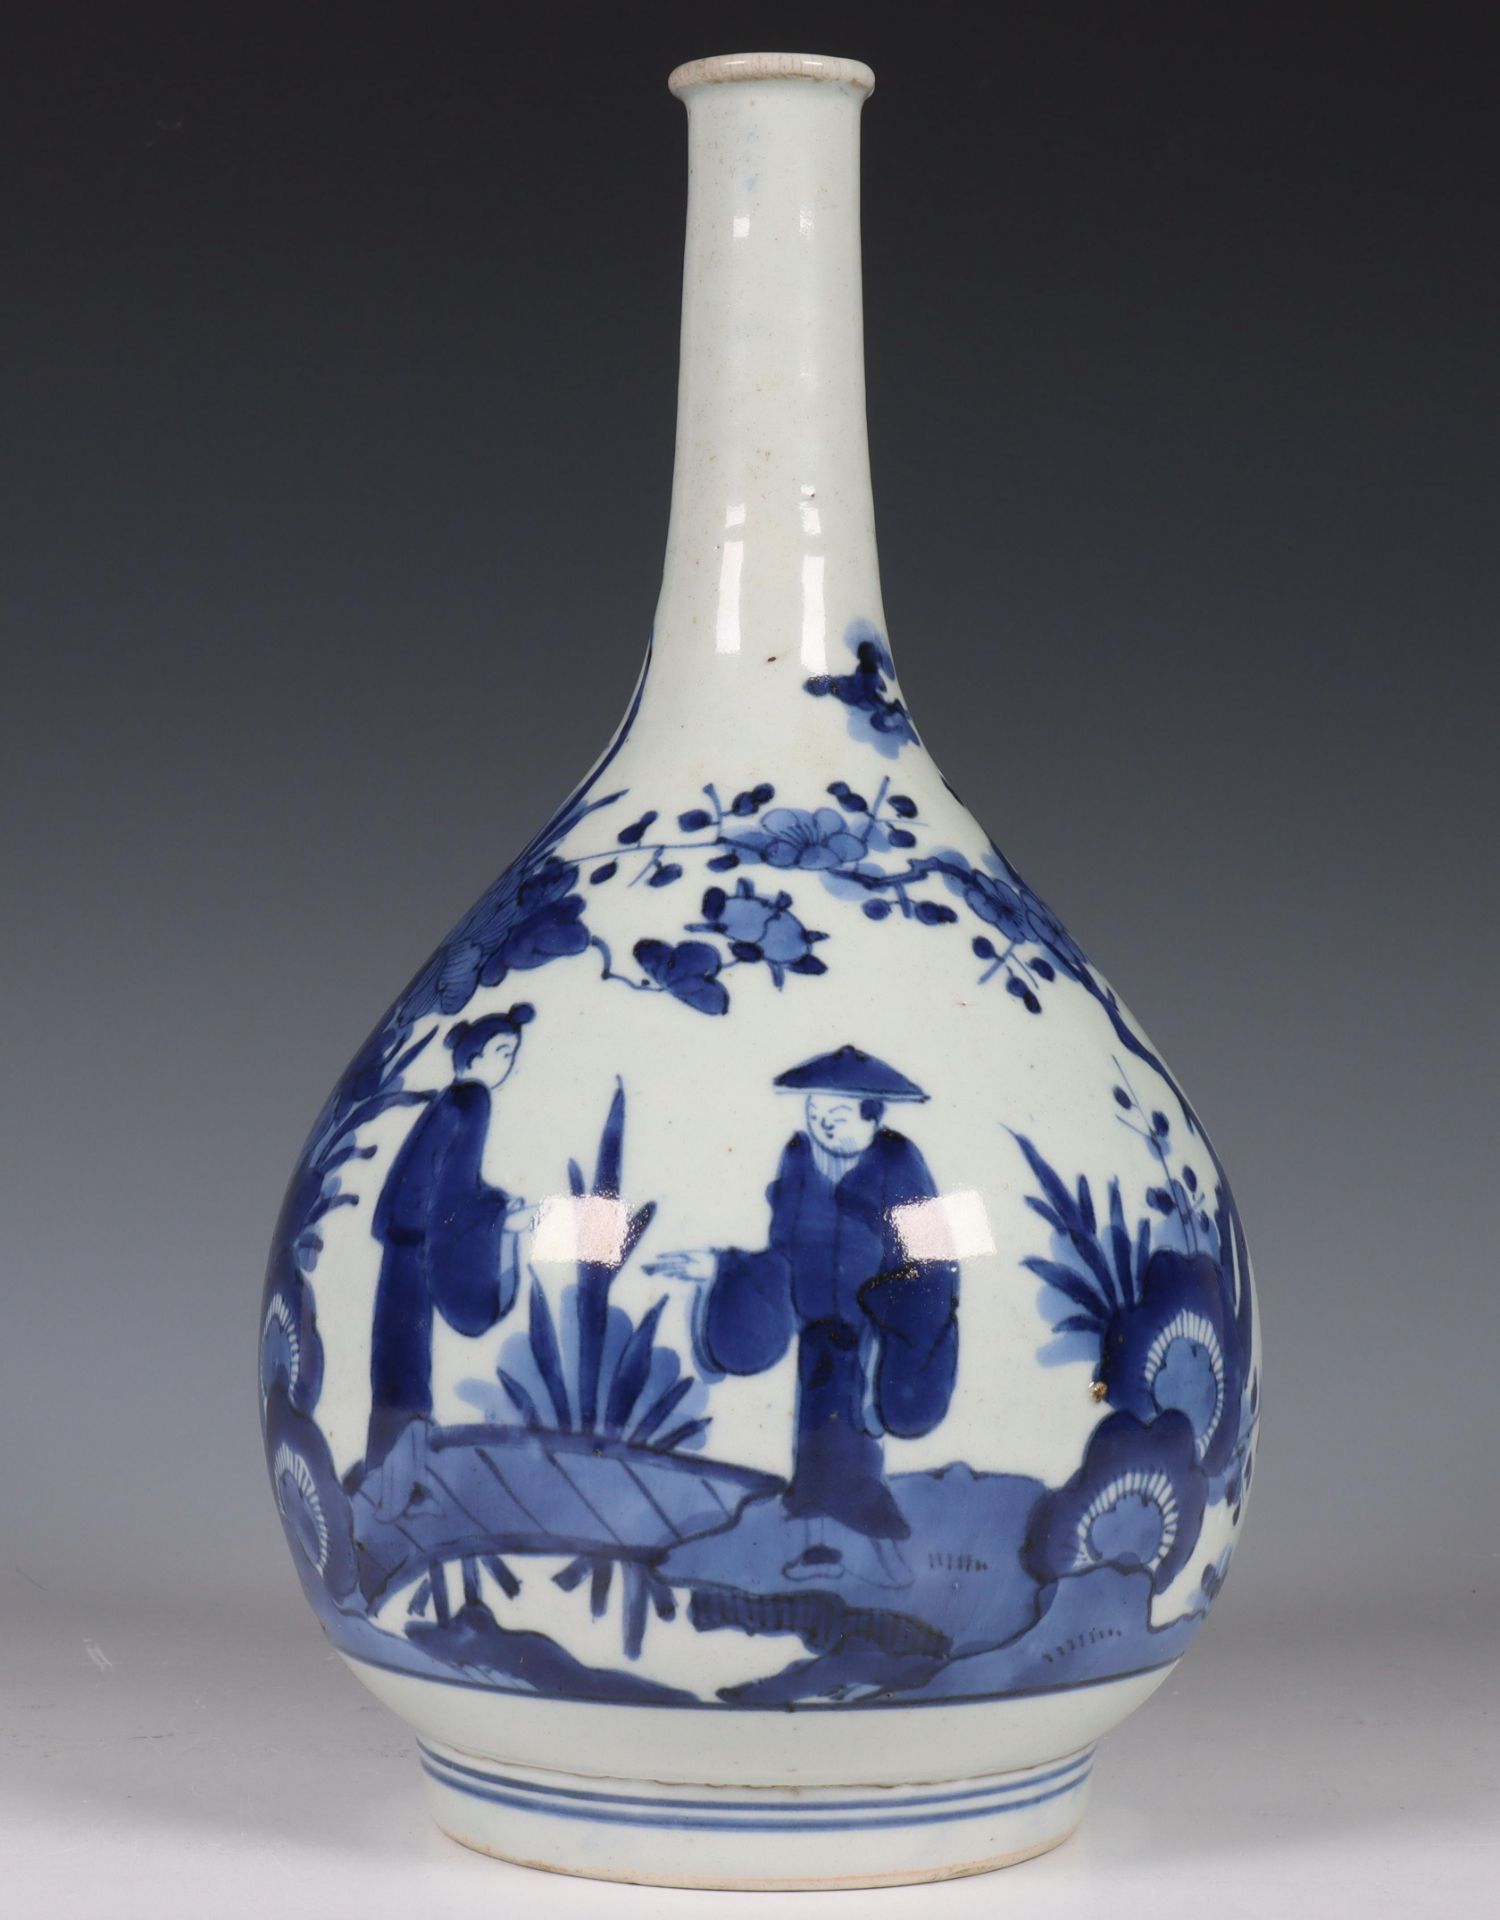 Japan, Arita blue and white porcelain bottle vase, Edo period, late 17th century, decorated with - Image 5 of 16